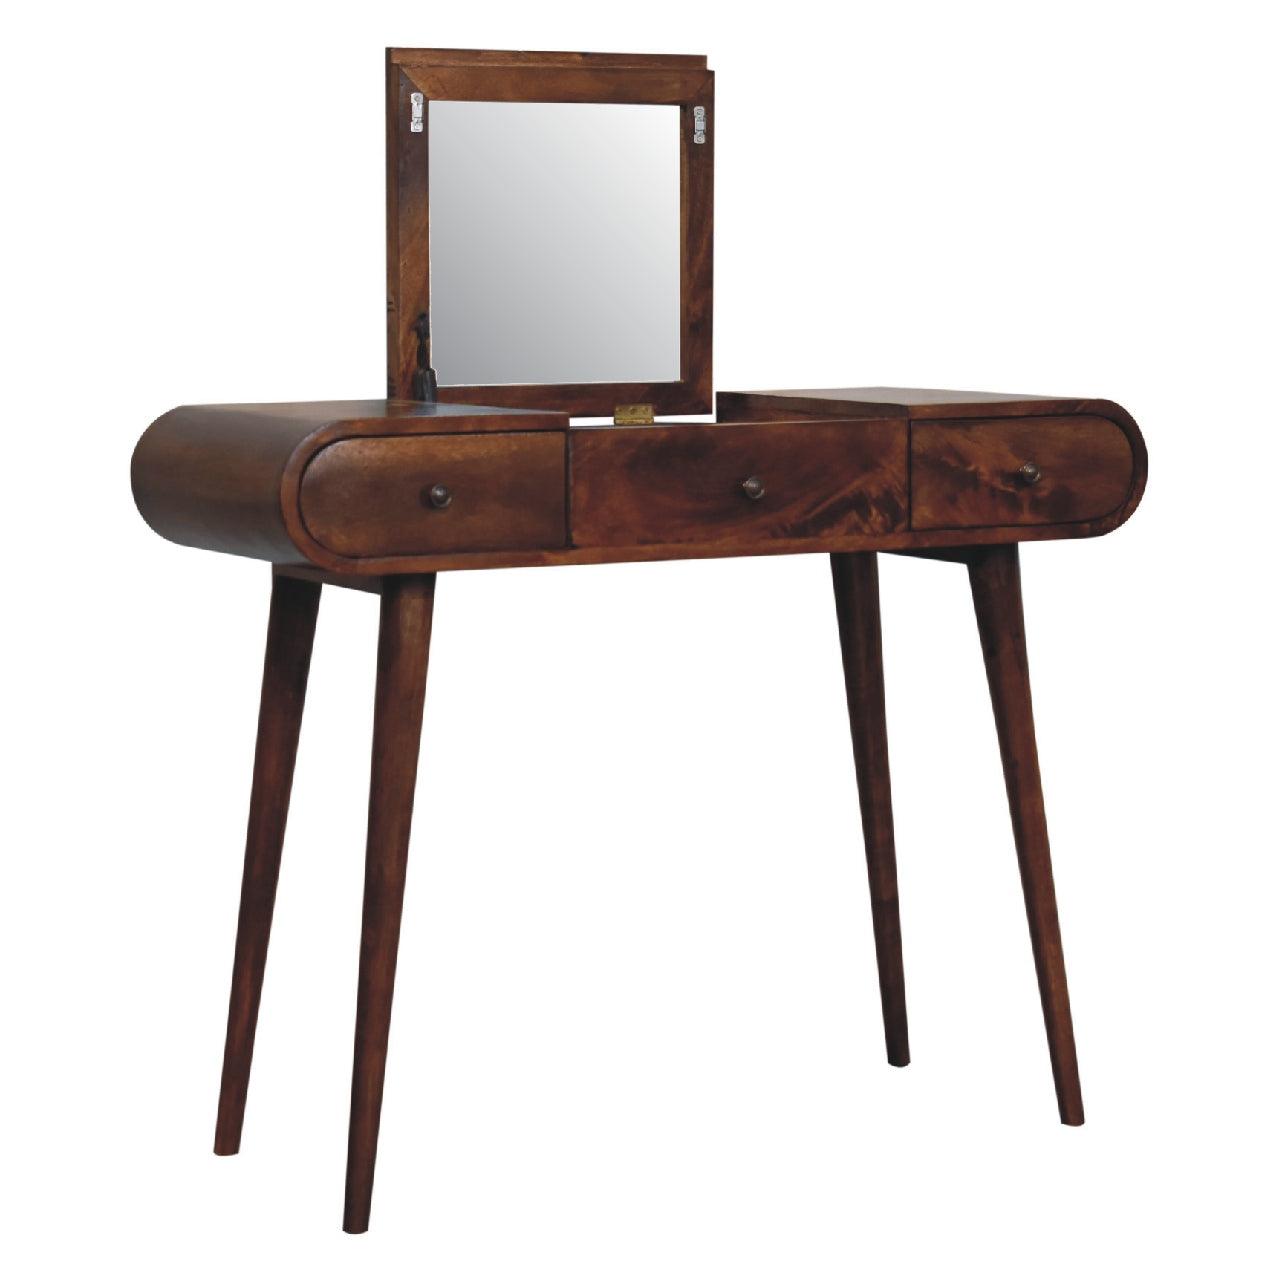 Chestnut Dressing Table with Foldable Mirror - Abode Decor